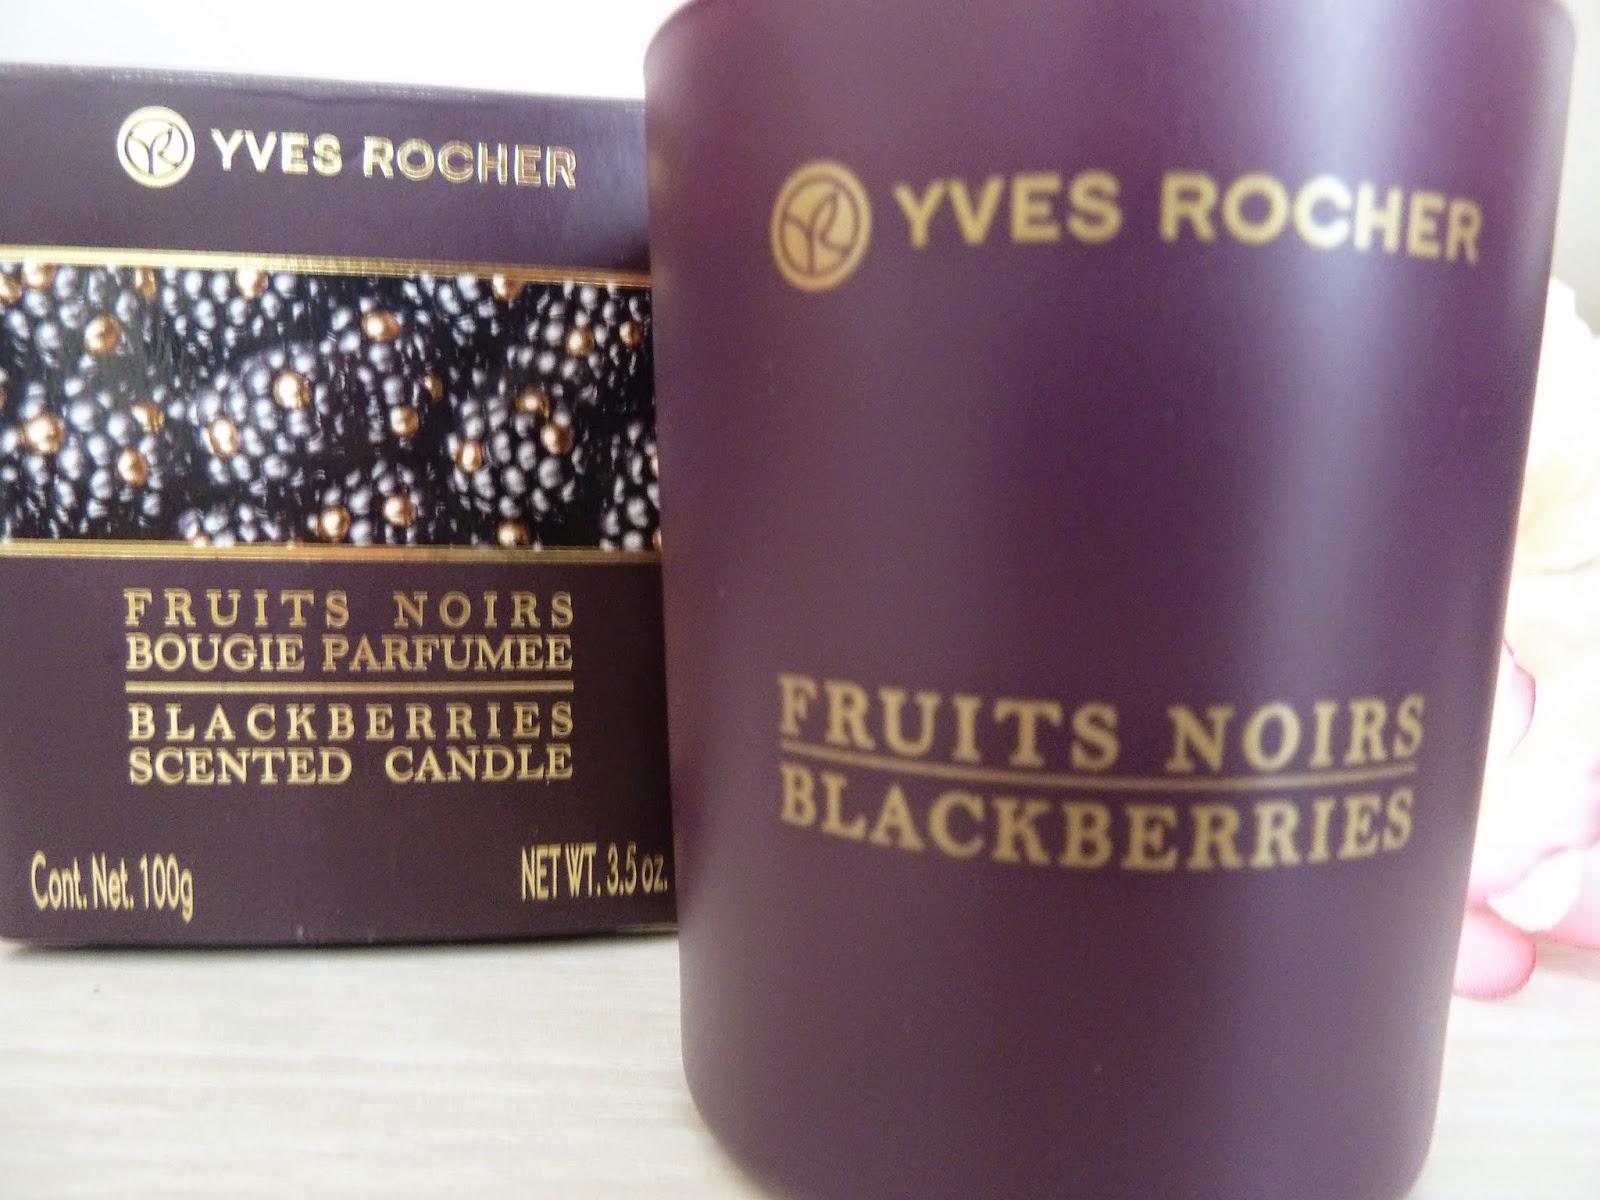 Collection Fruits Noirs - Yves Rocher